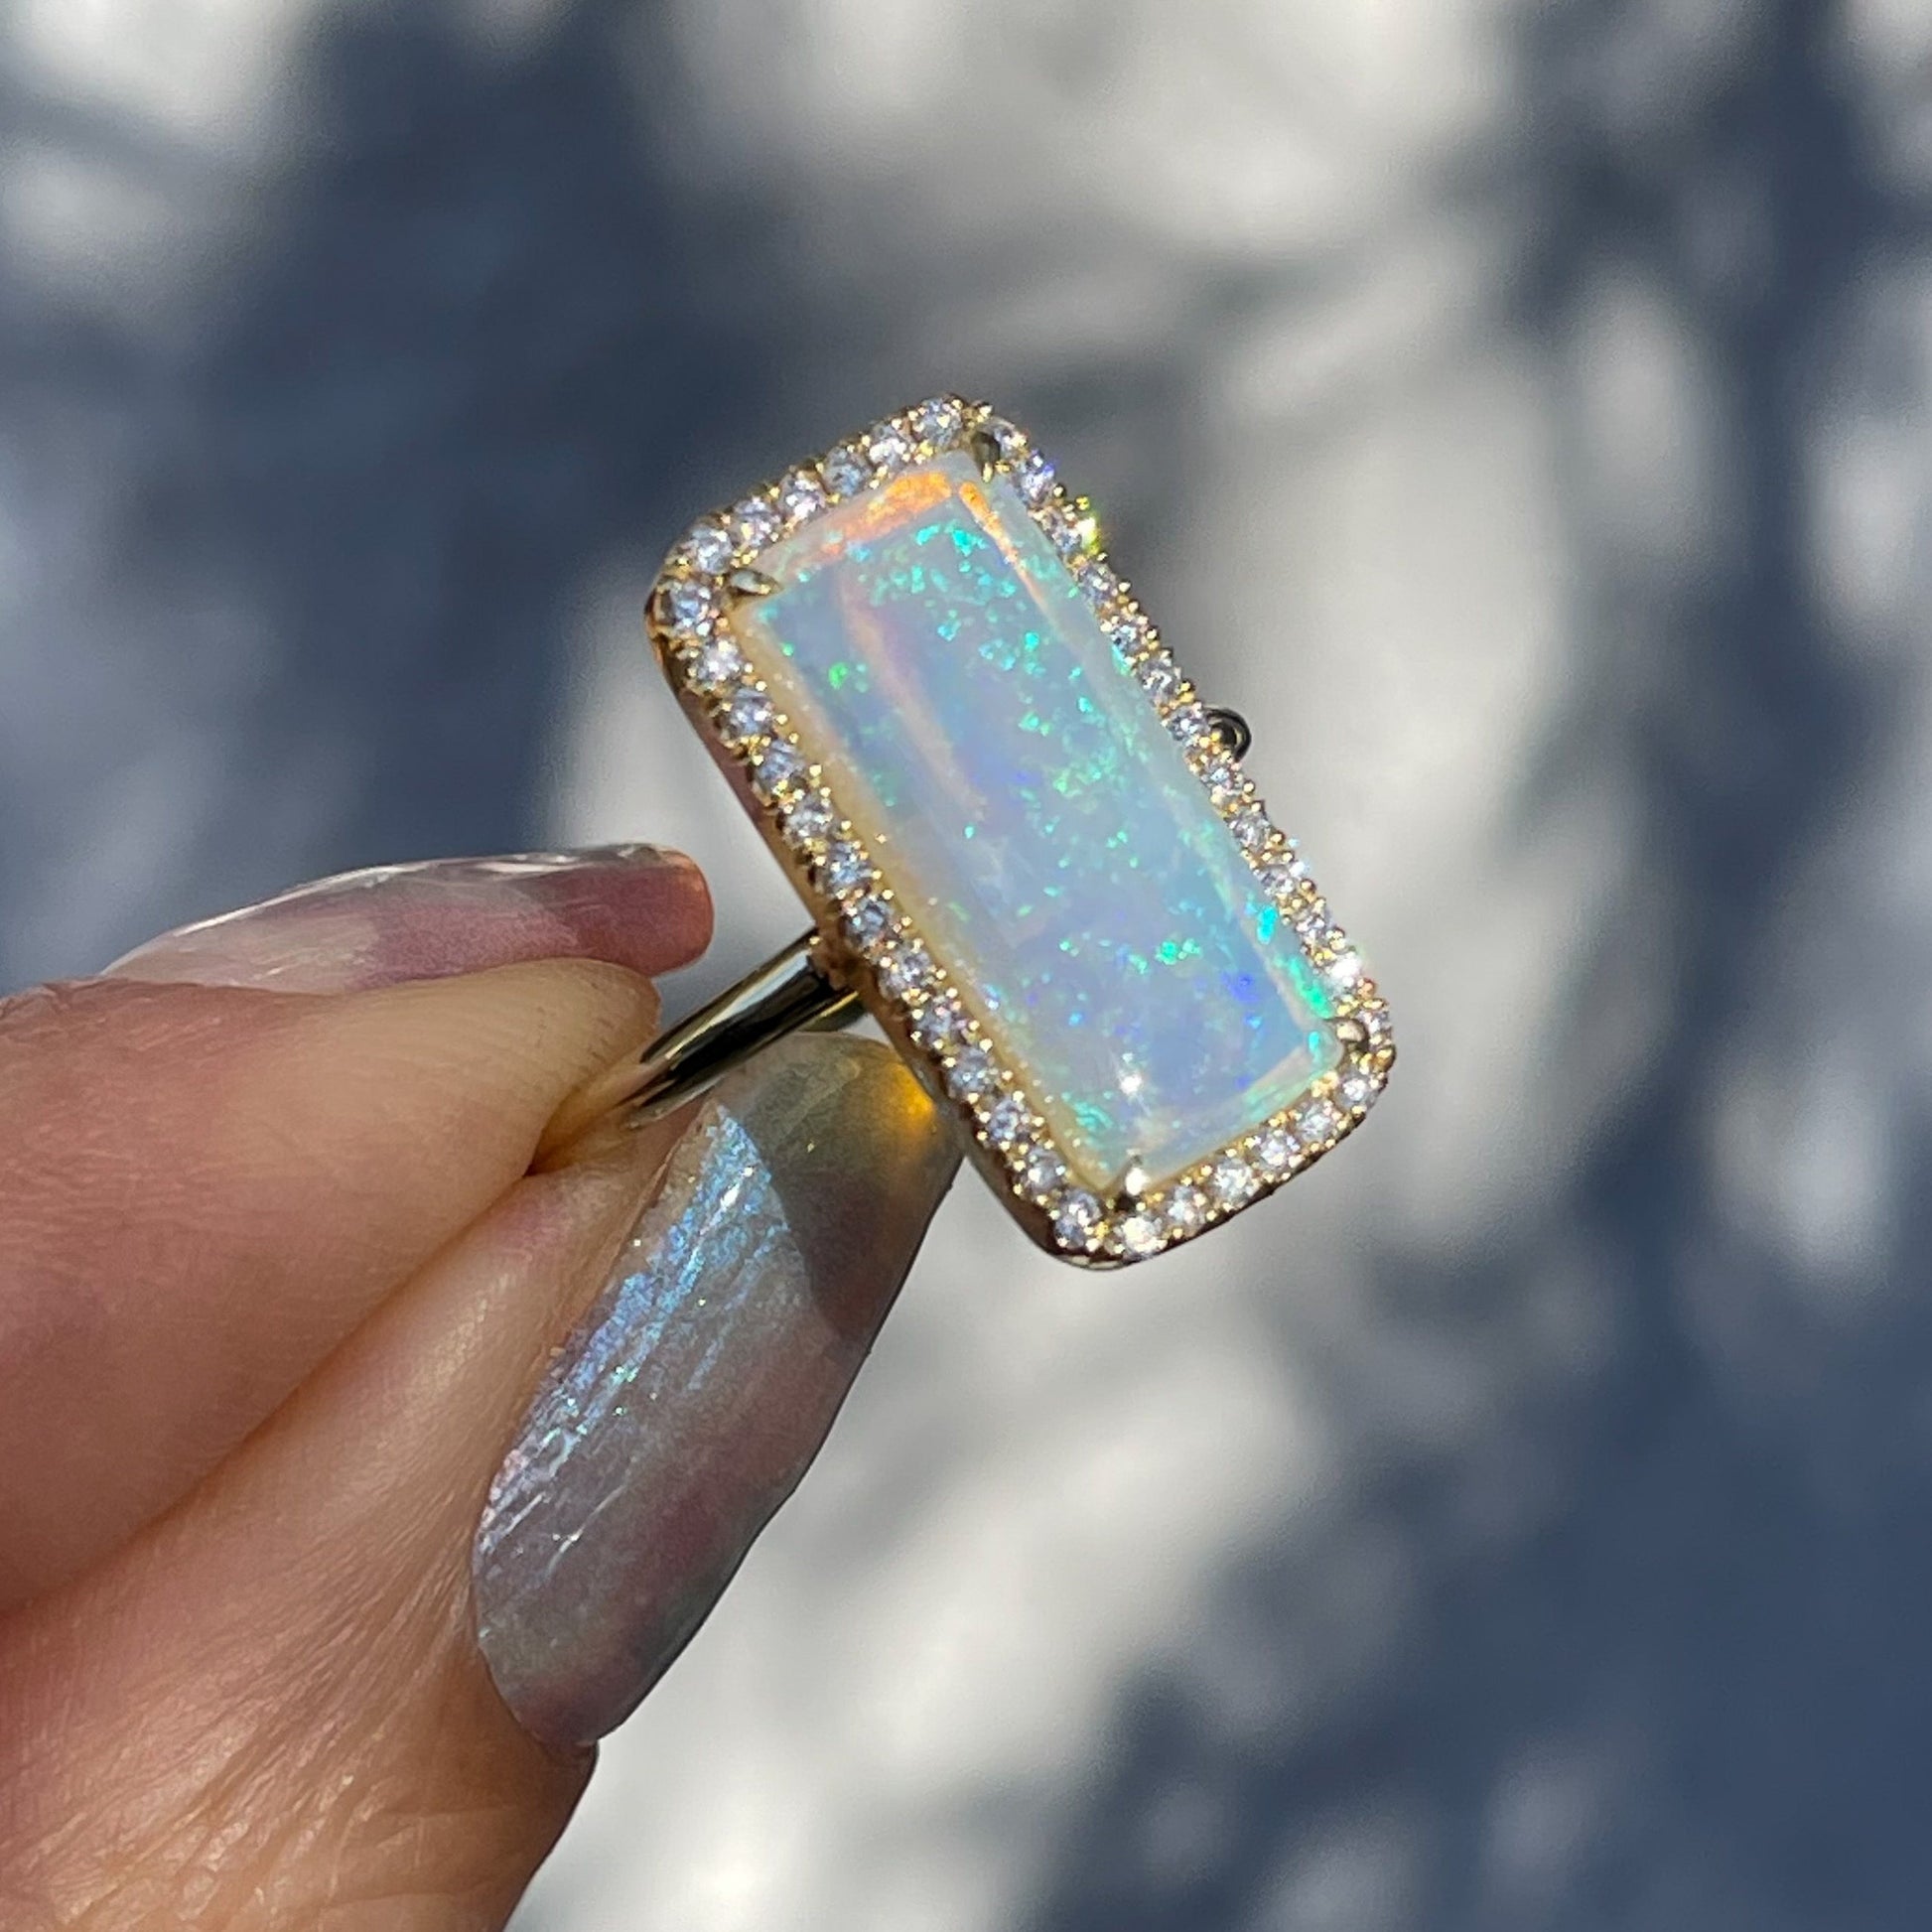 An Australian Opal Ring by NIXIN Jewelry shot at a side angle in front of a grey wall. An opal ring with diamonds.